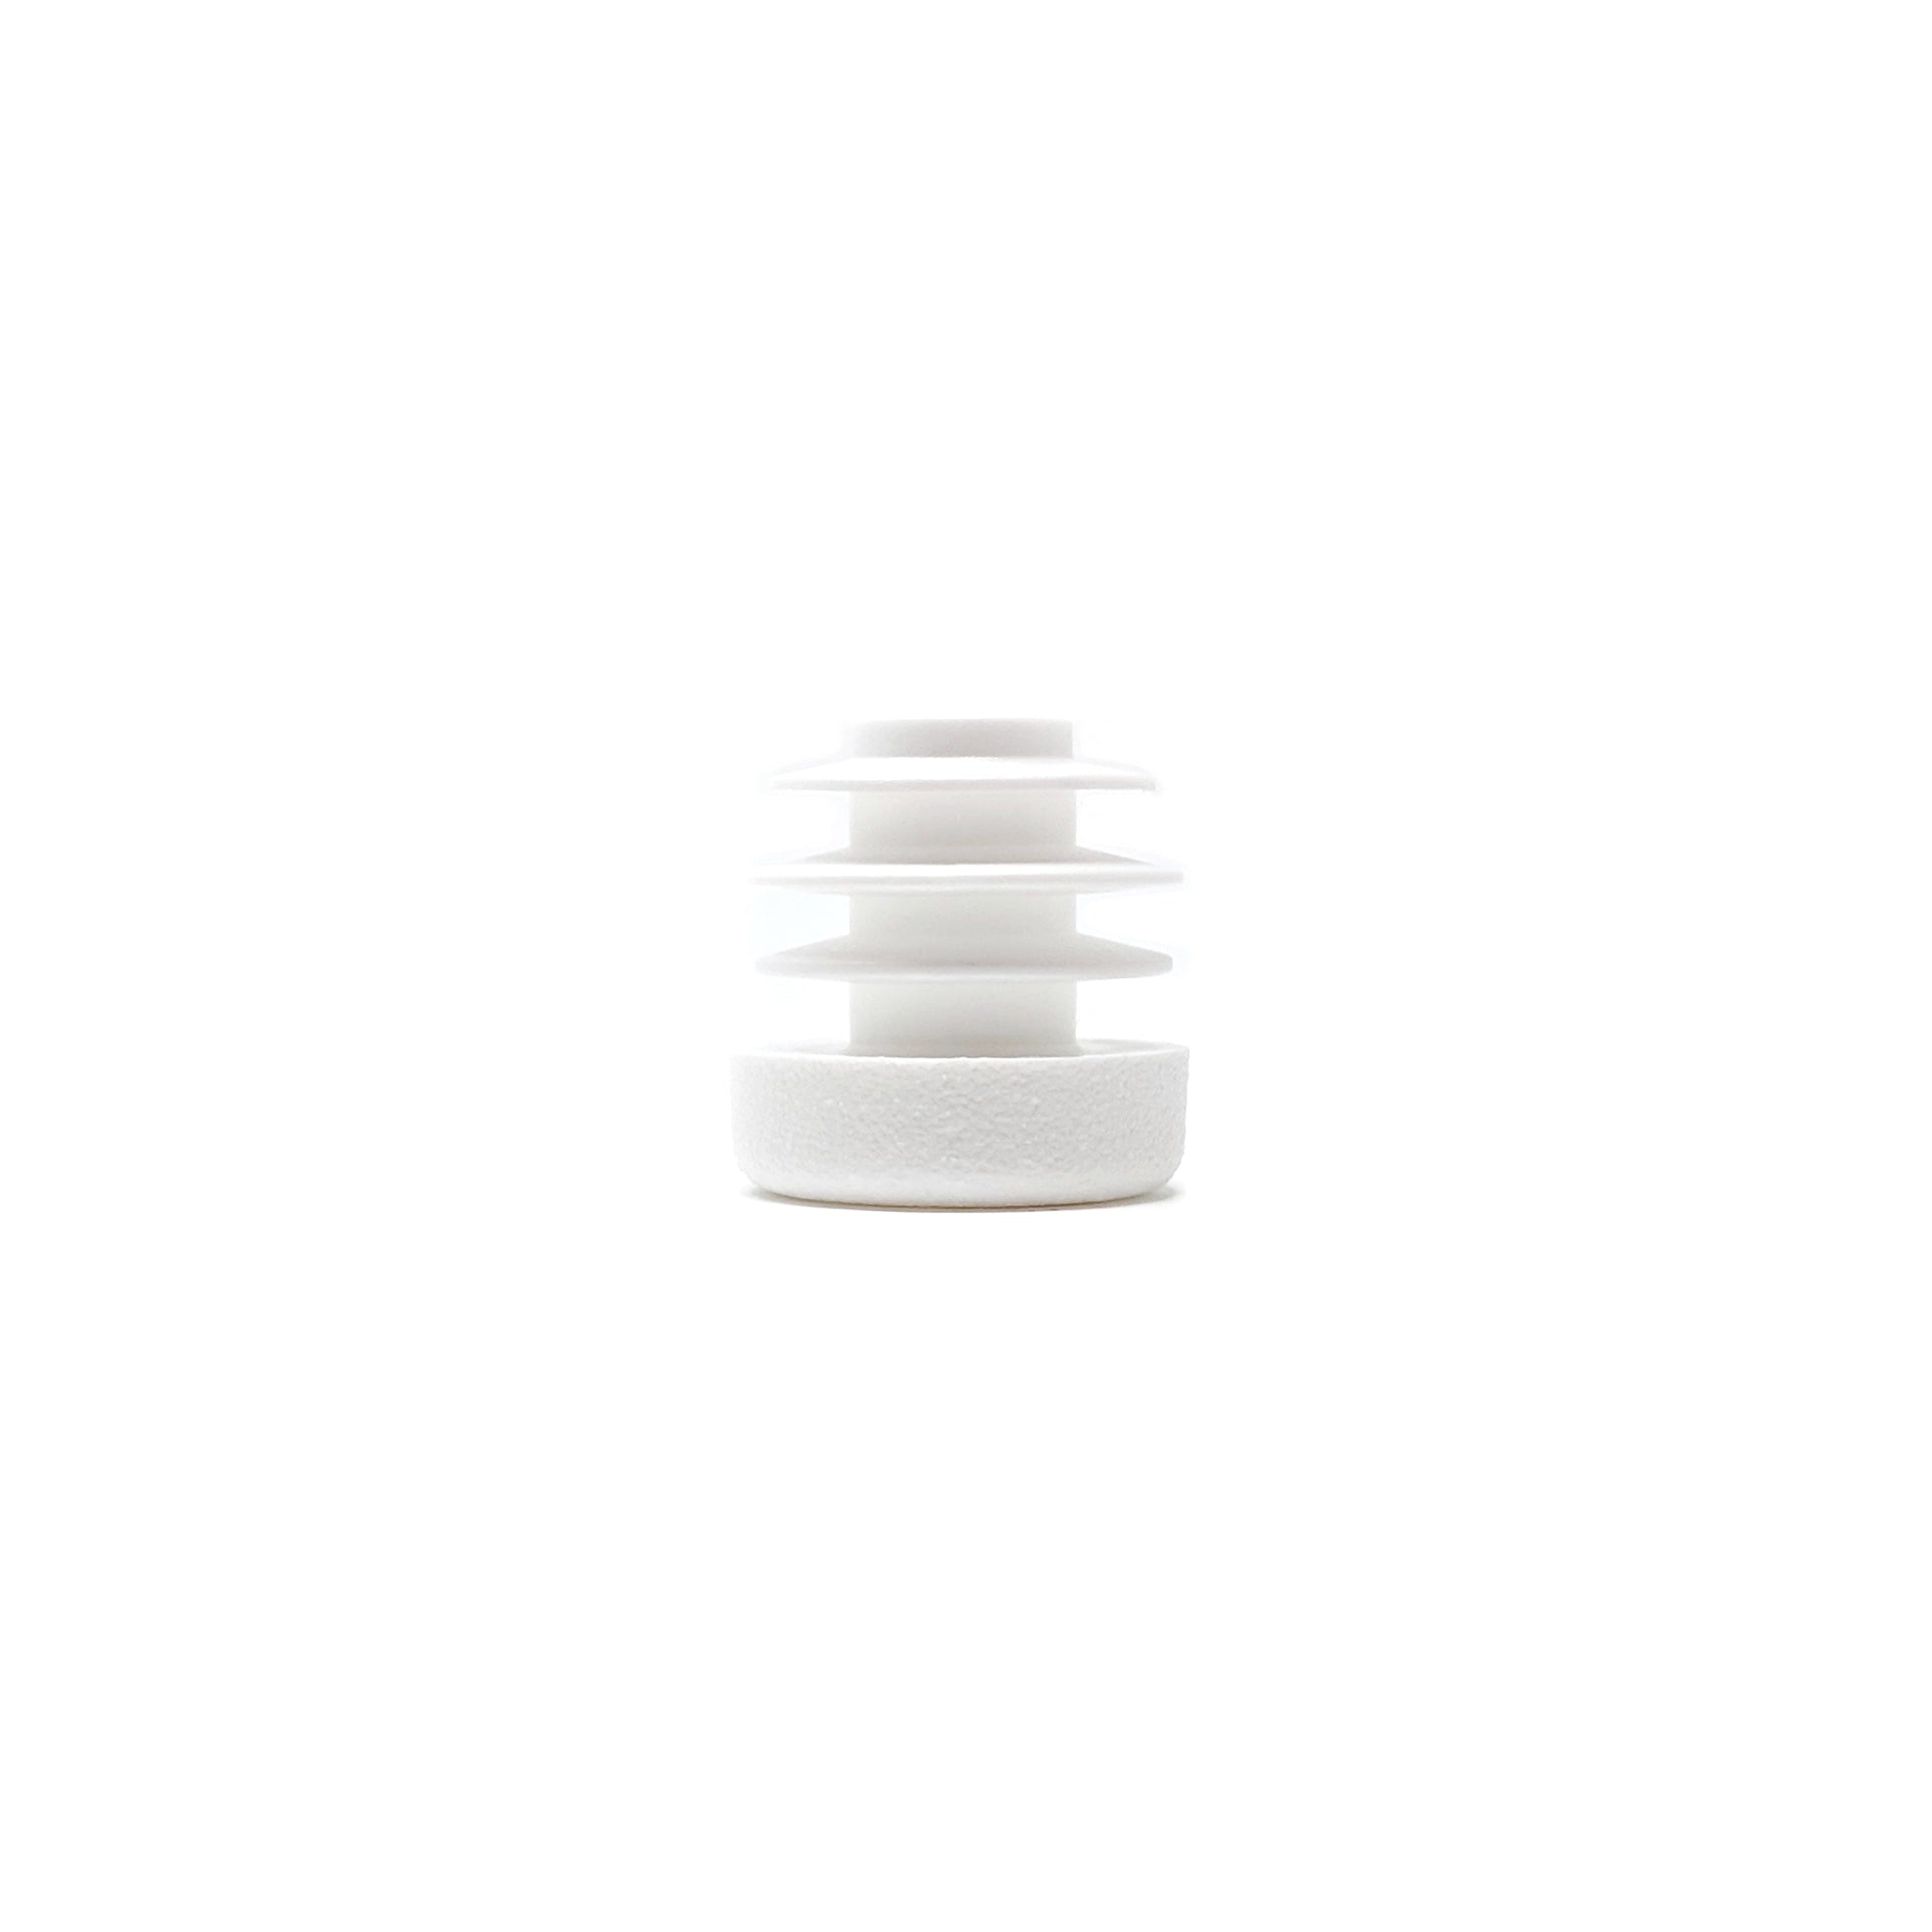 Round Tube Inserts 16mm White | Made in Germany | Keay Vital Parts - Keay Vital Parts